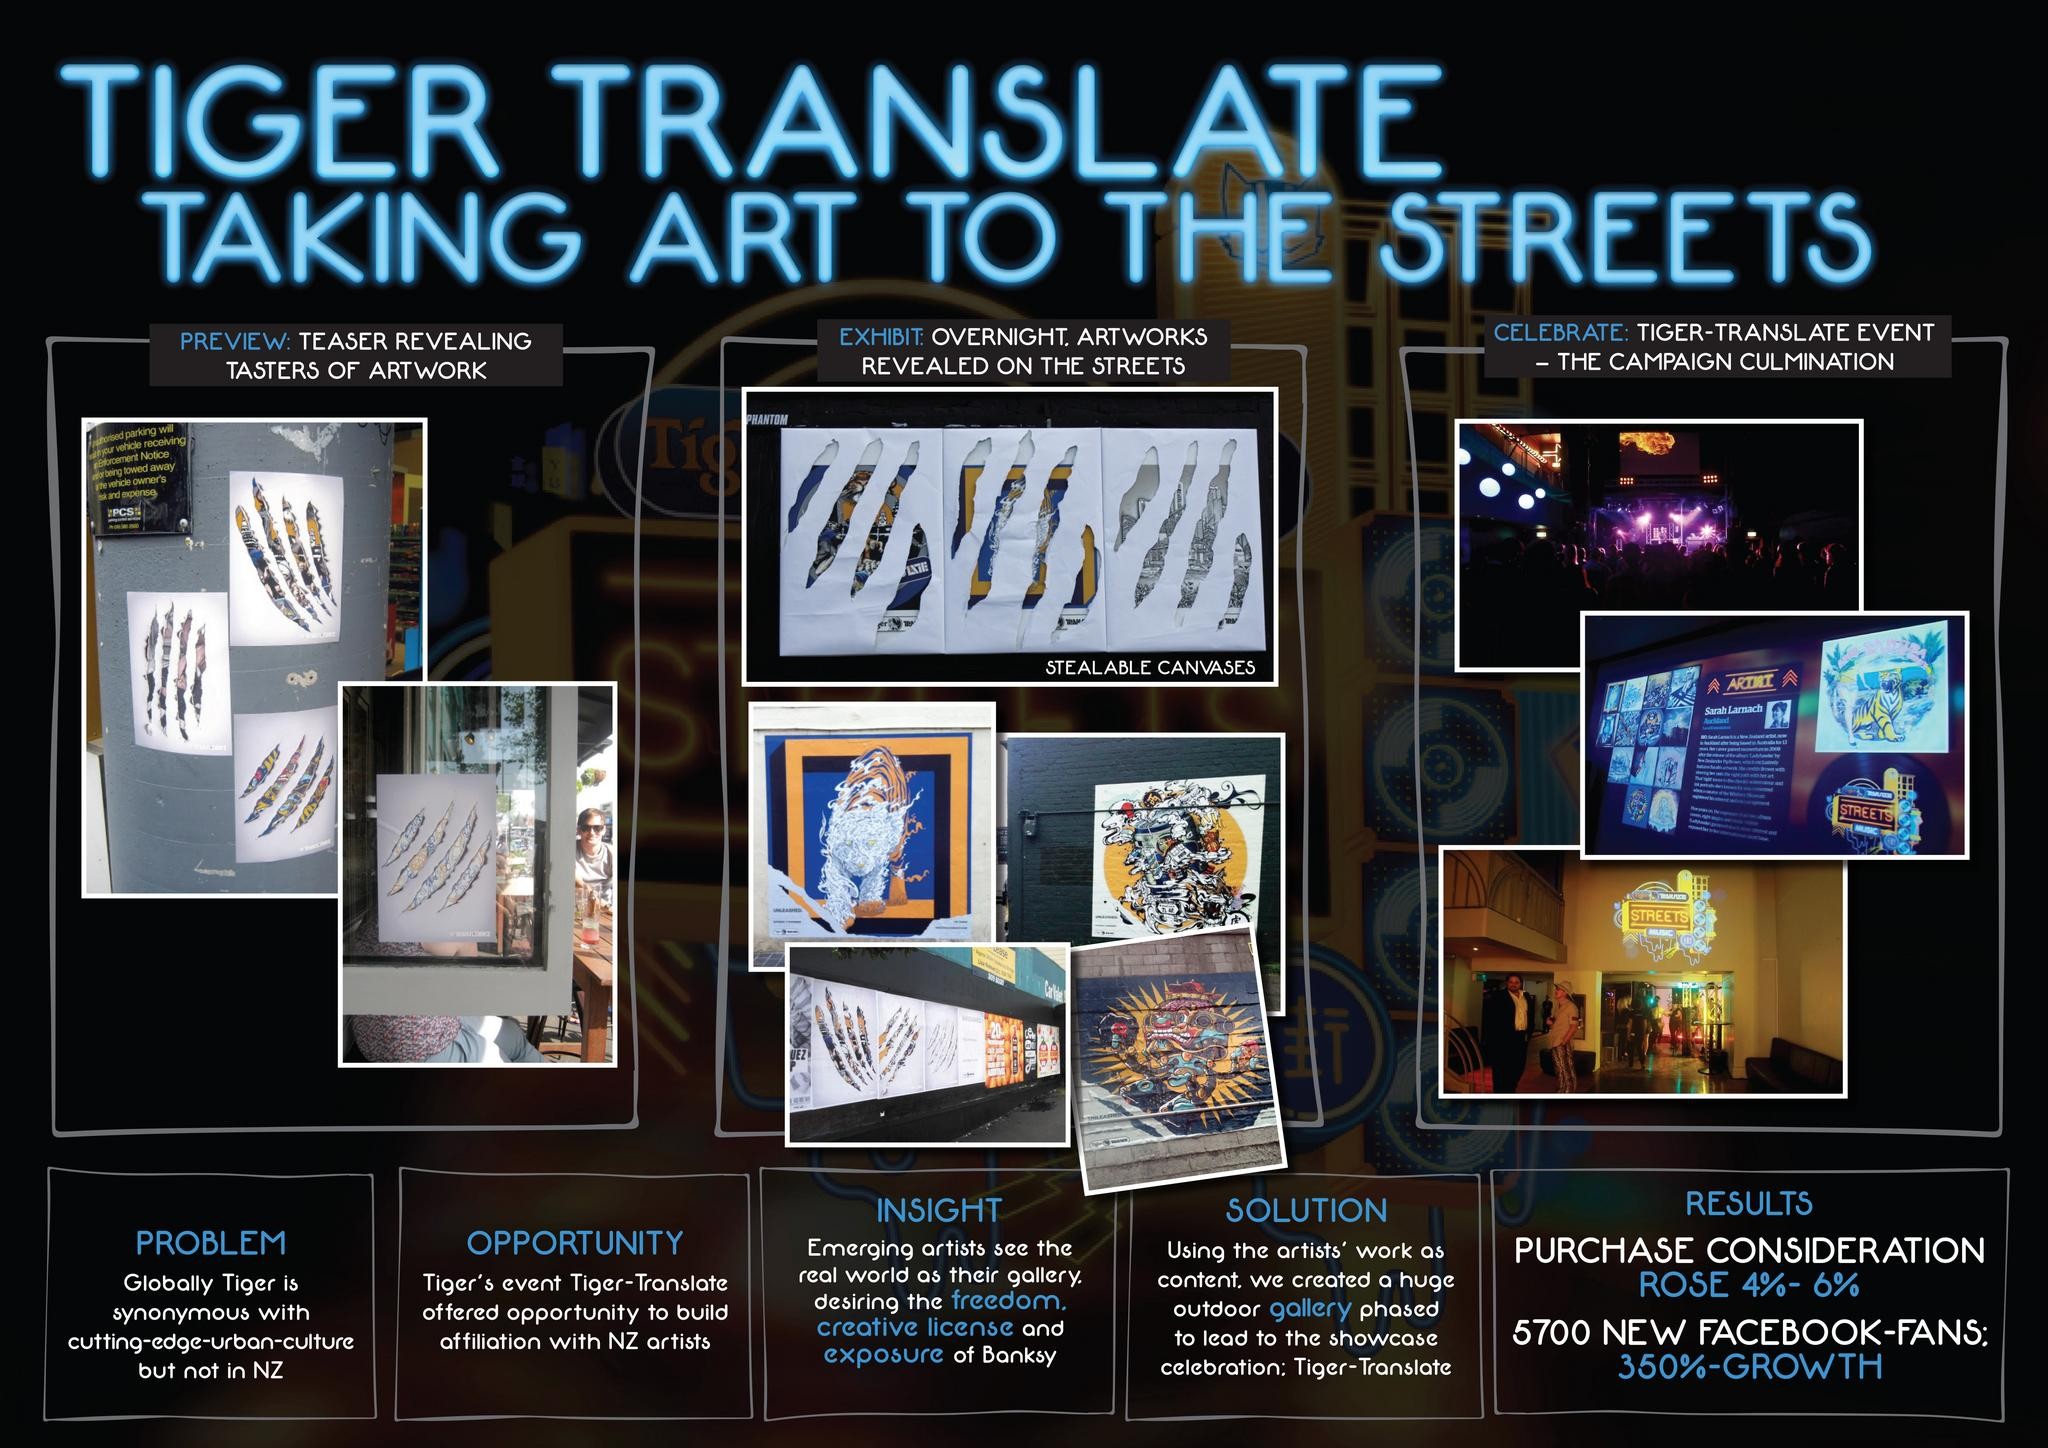 TIGER TRANSLATE: TAKING ART TO THE STREETS